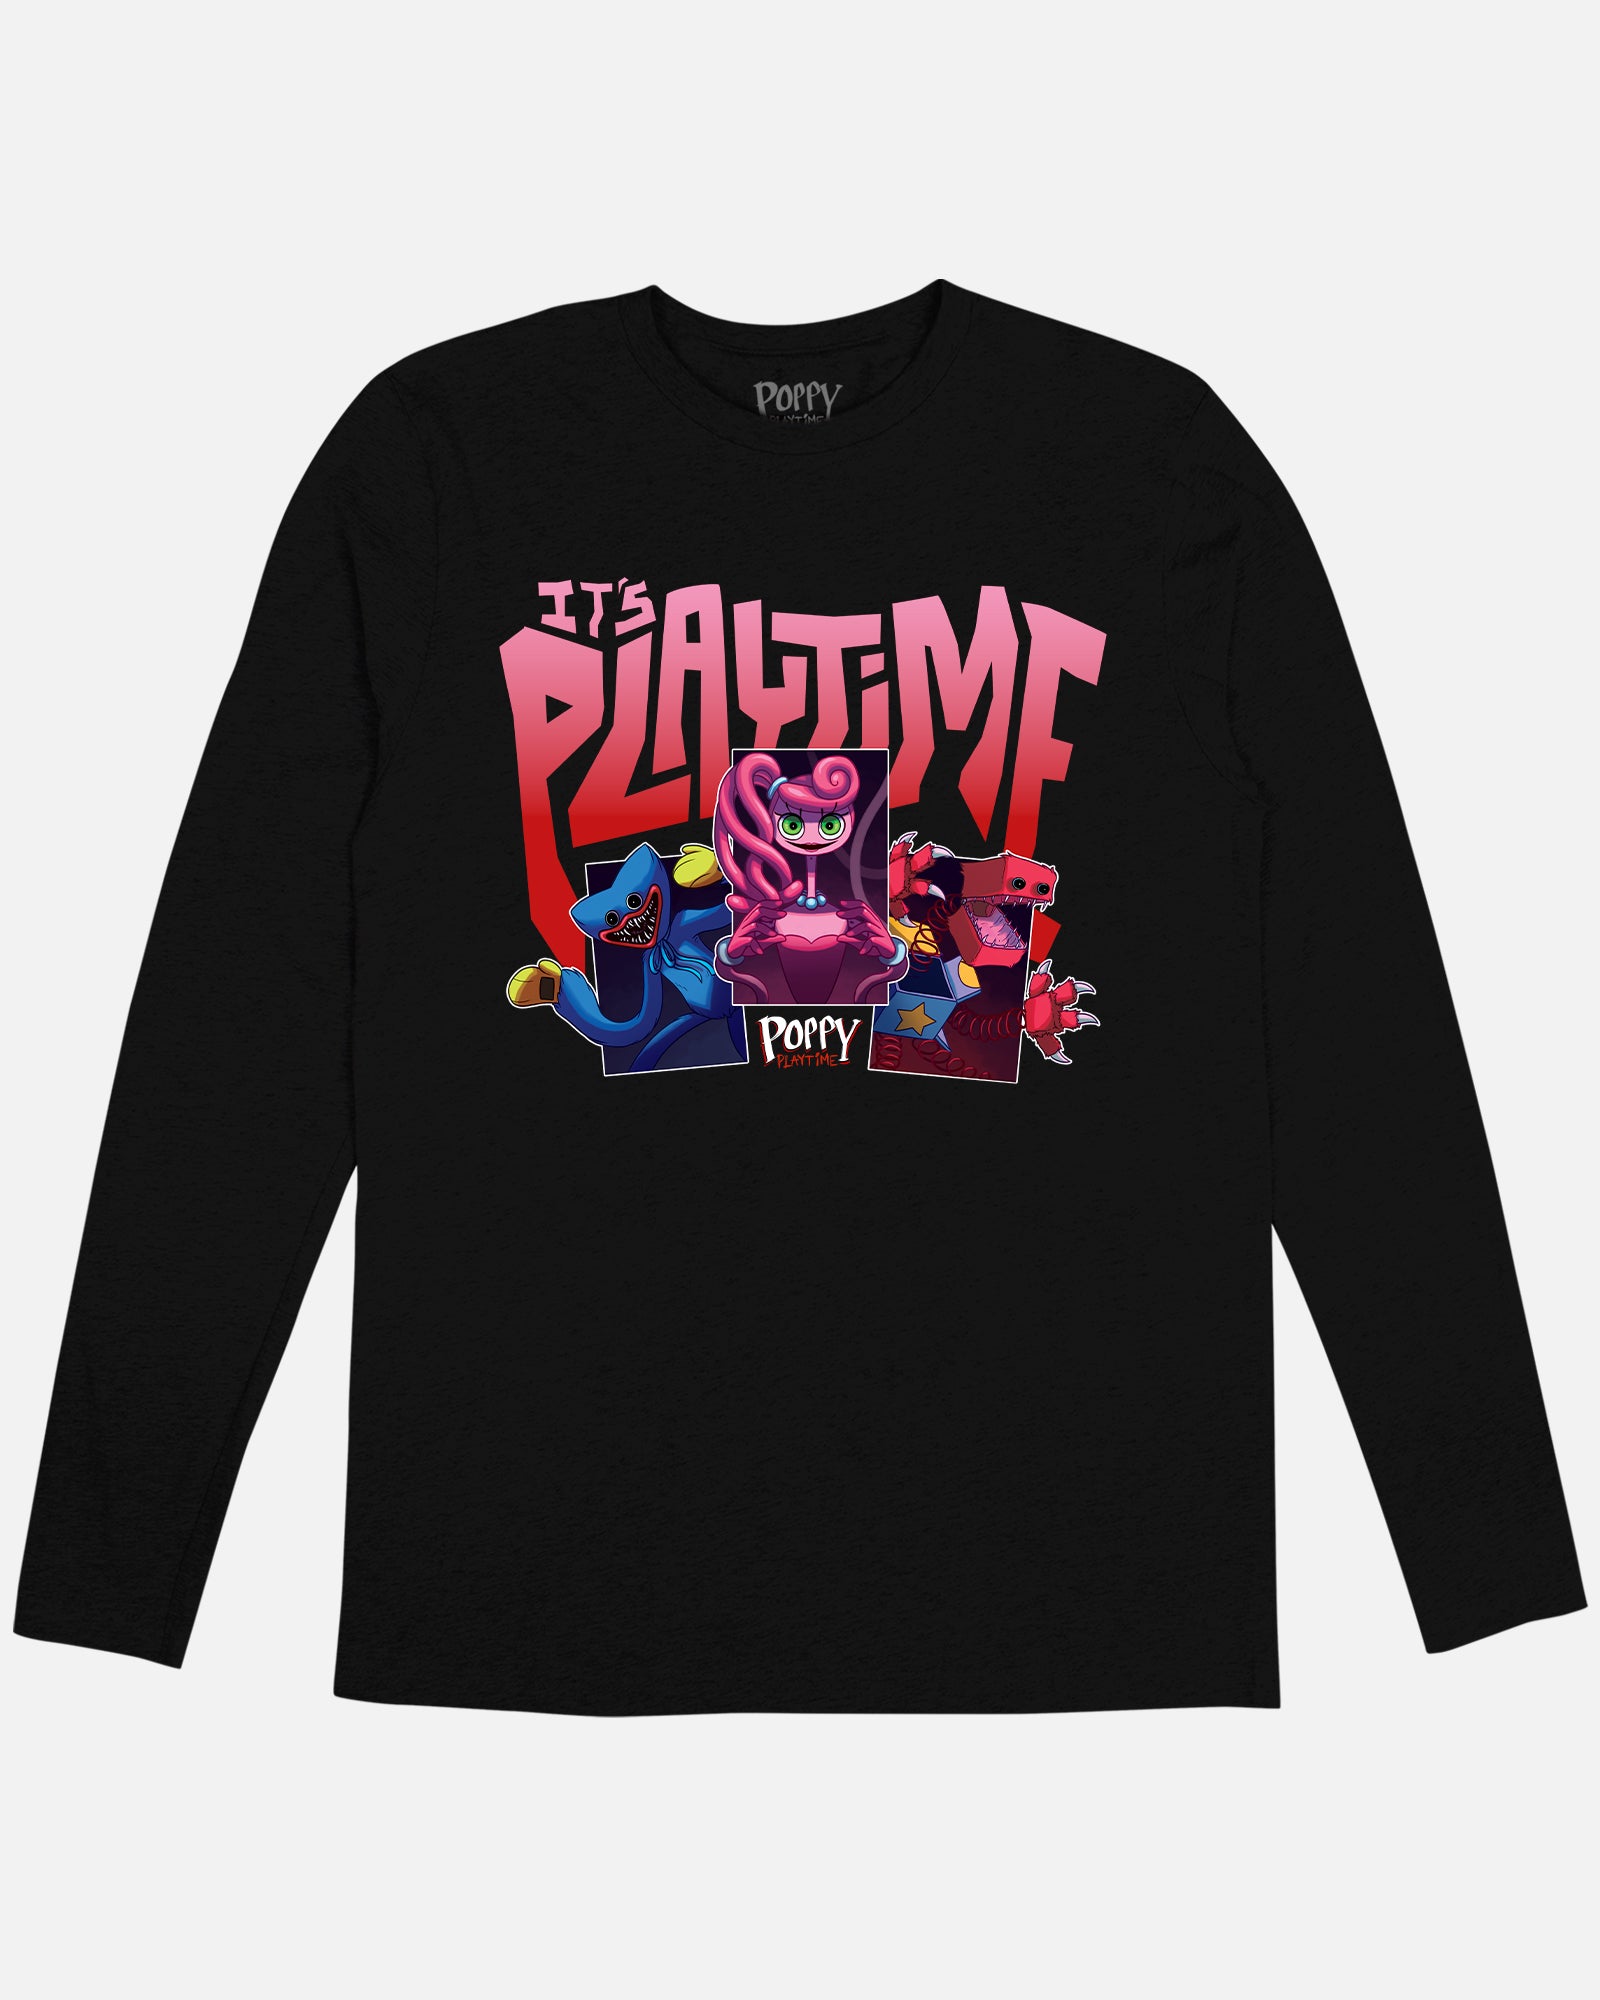 It's Playtime Poppy Gang Long Sleeve Tee – Poppy Playtime Official Store